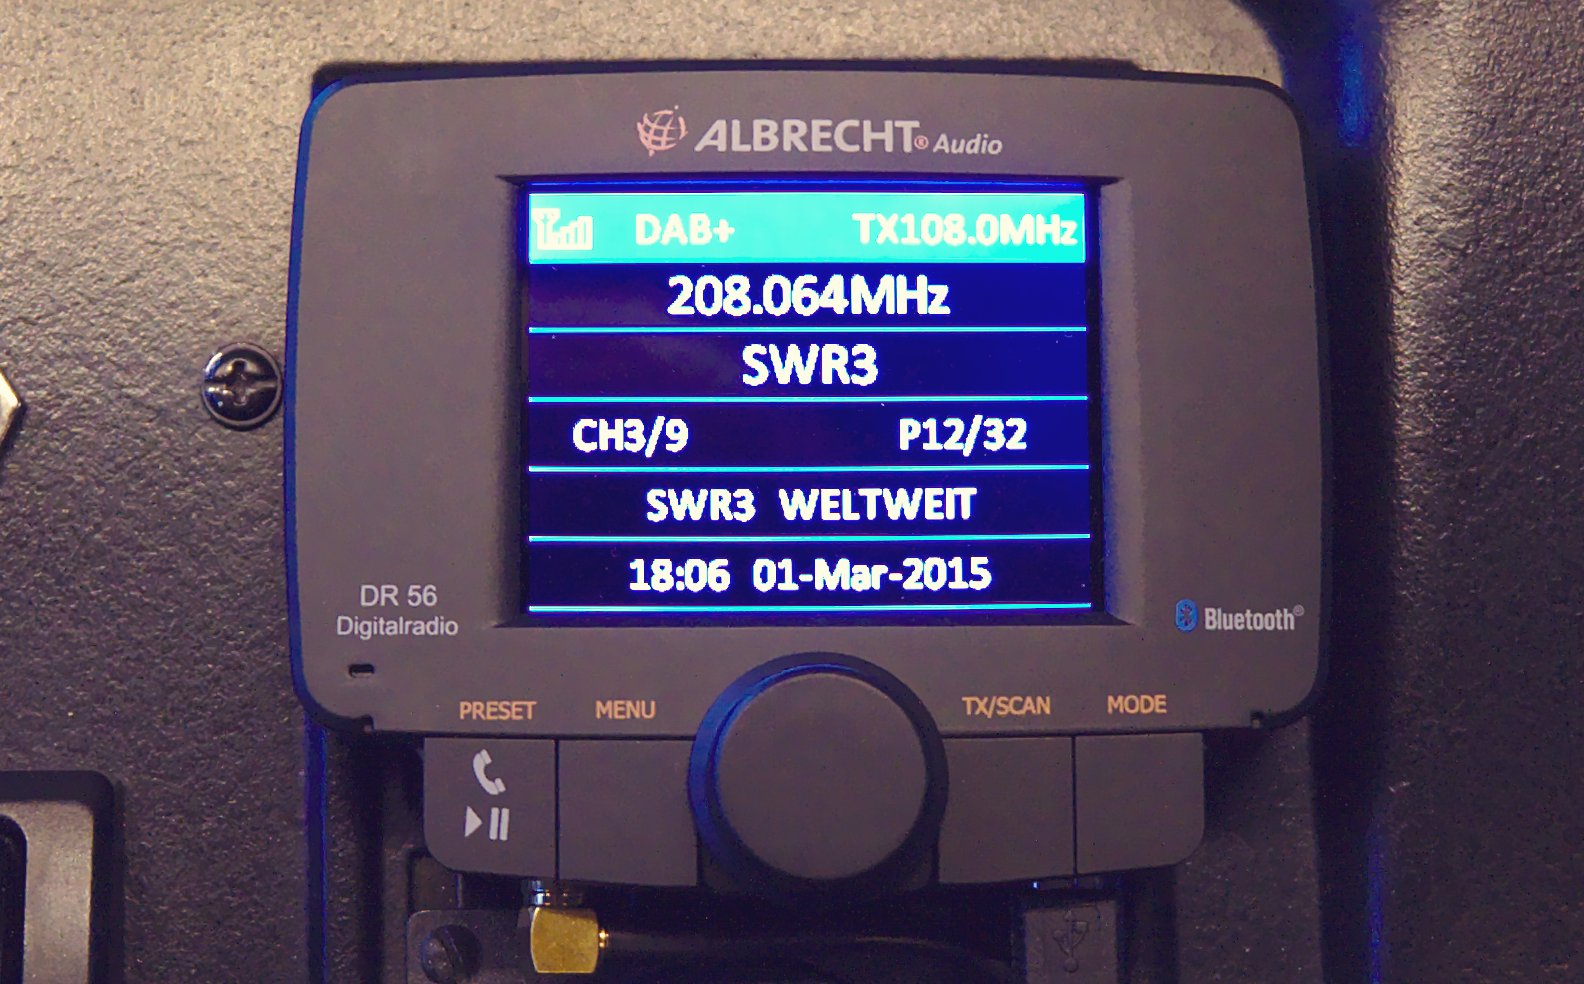 Featured image for “Im Test: DAB+ Radio Albrecht DR56”